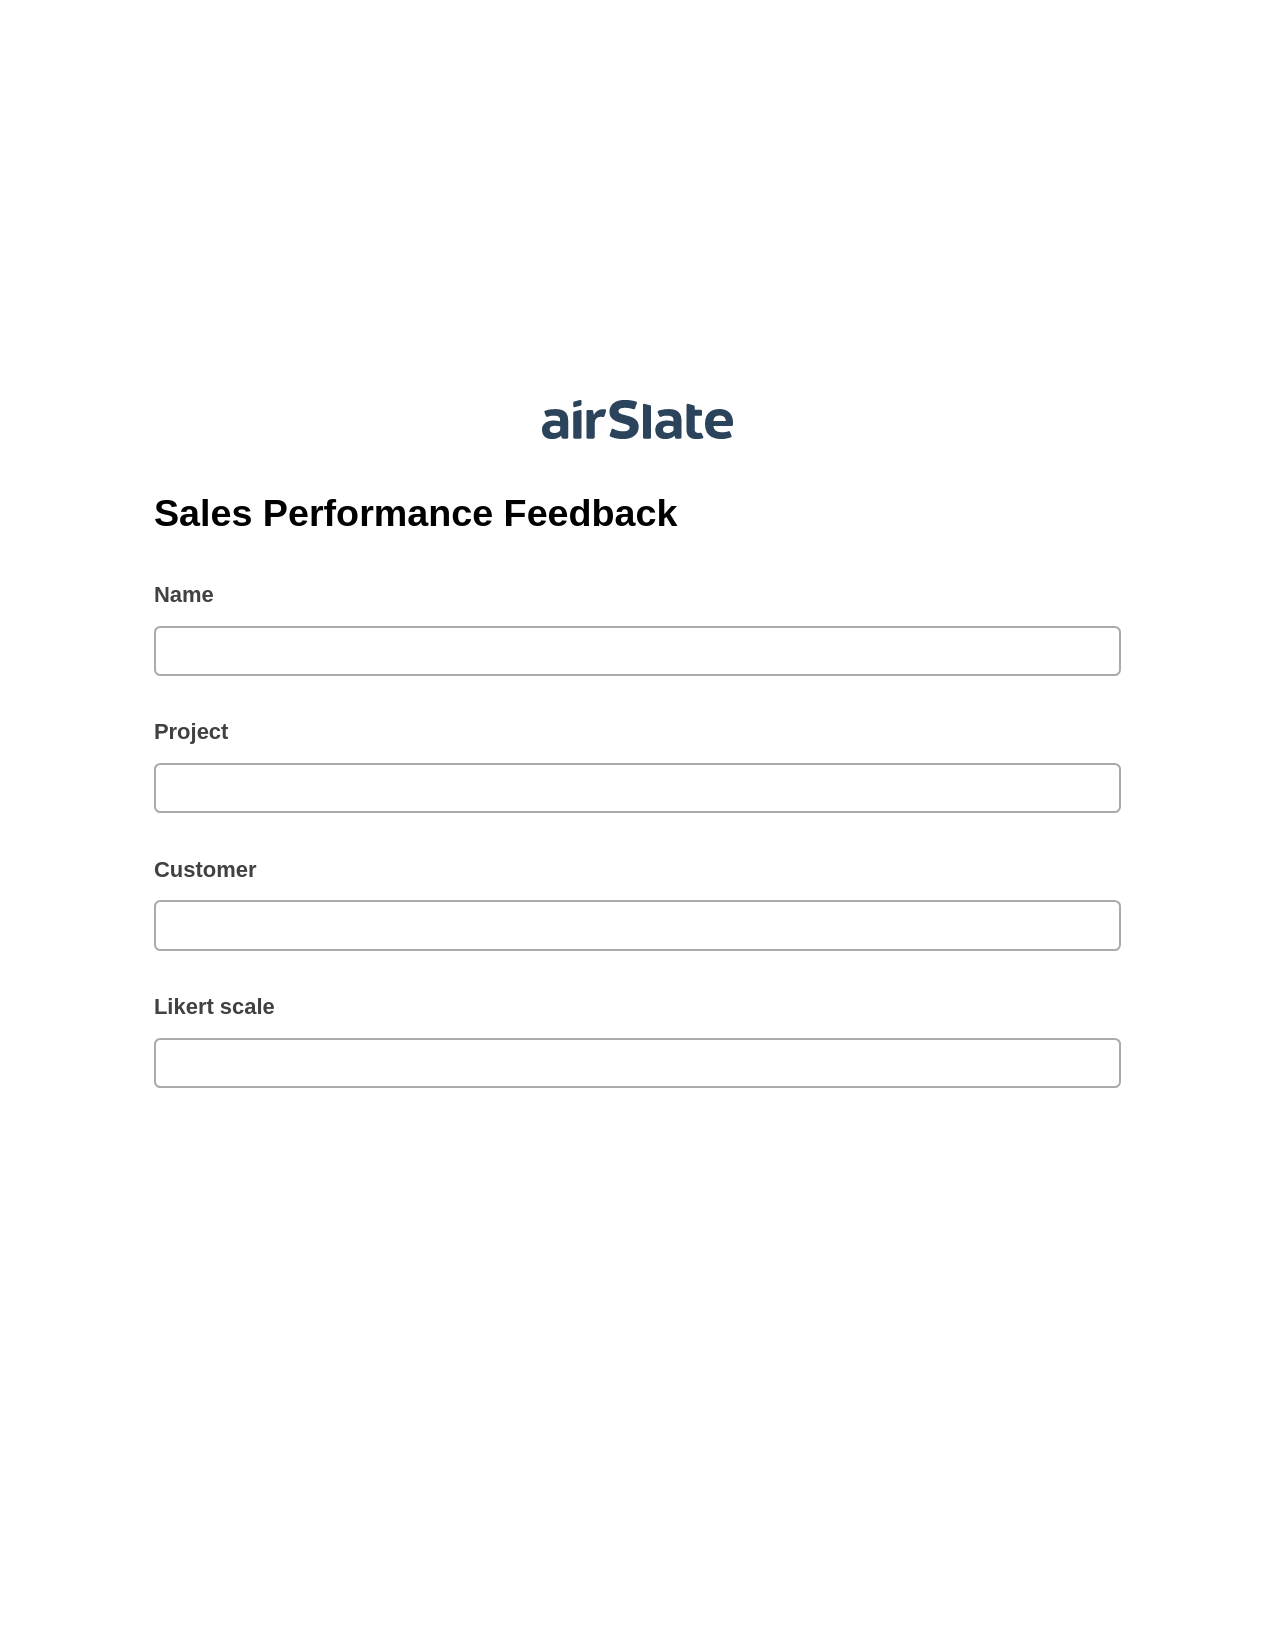 Sales Performance Feedback Pre-fill Slate from MS Dynamics 365 Records Bot, Update Salesforce Record Bot, Export to Smartsheet